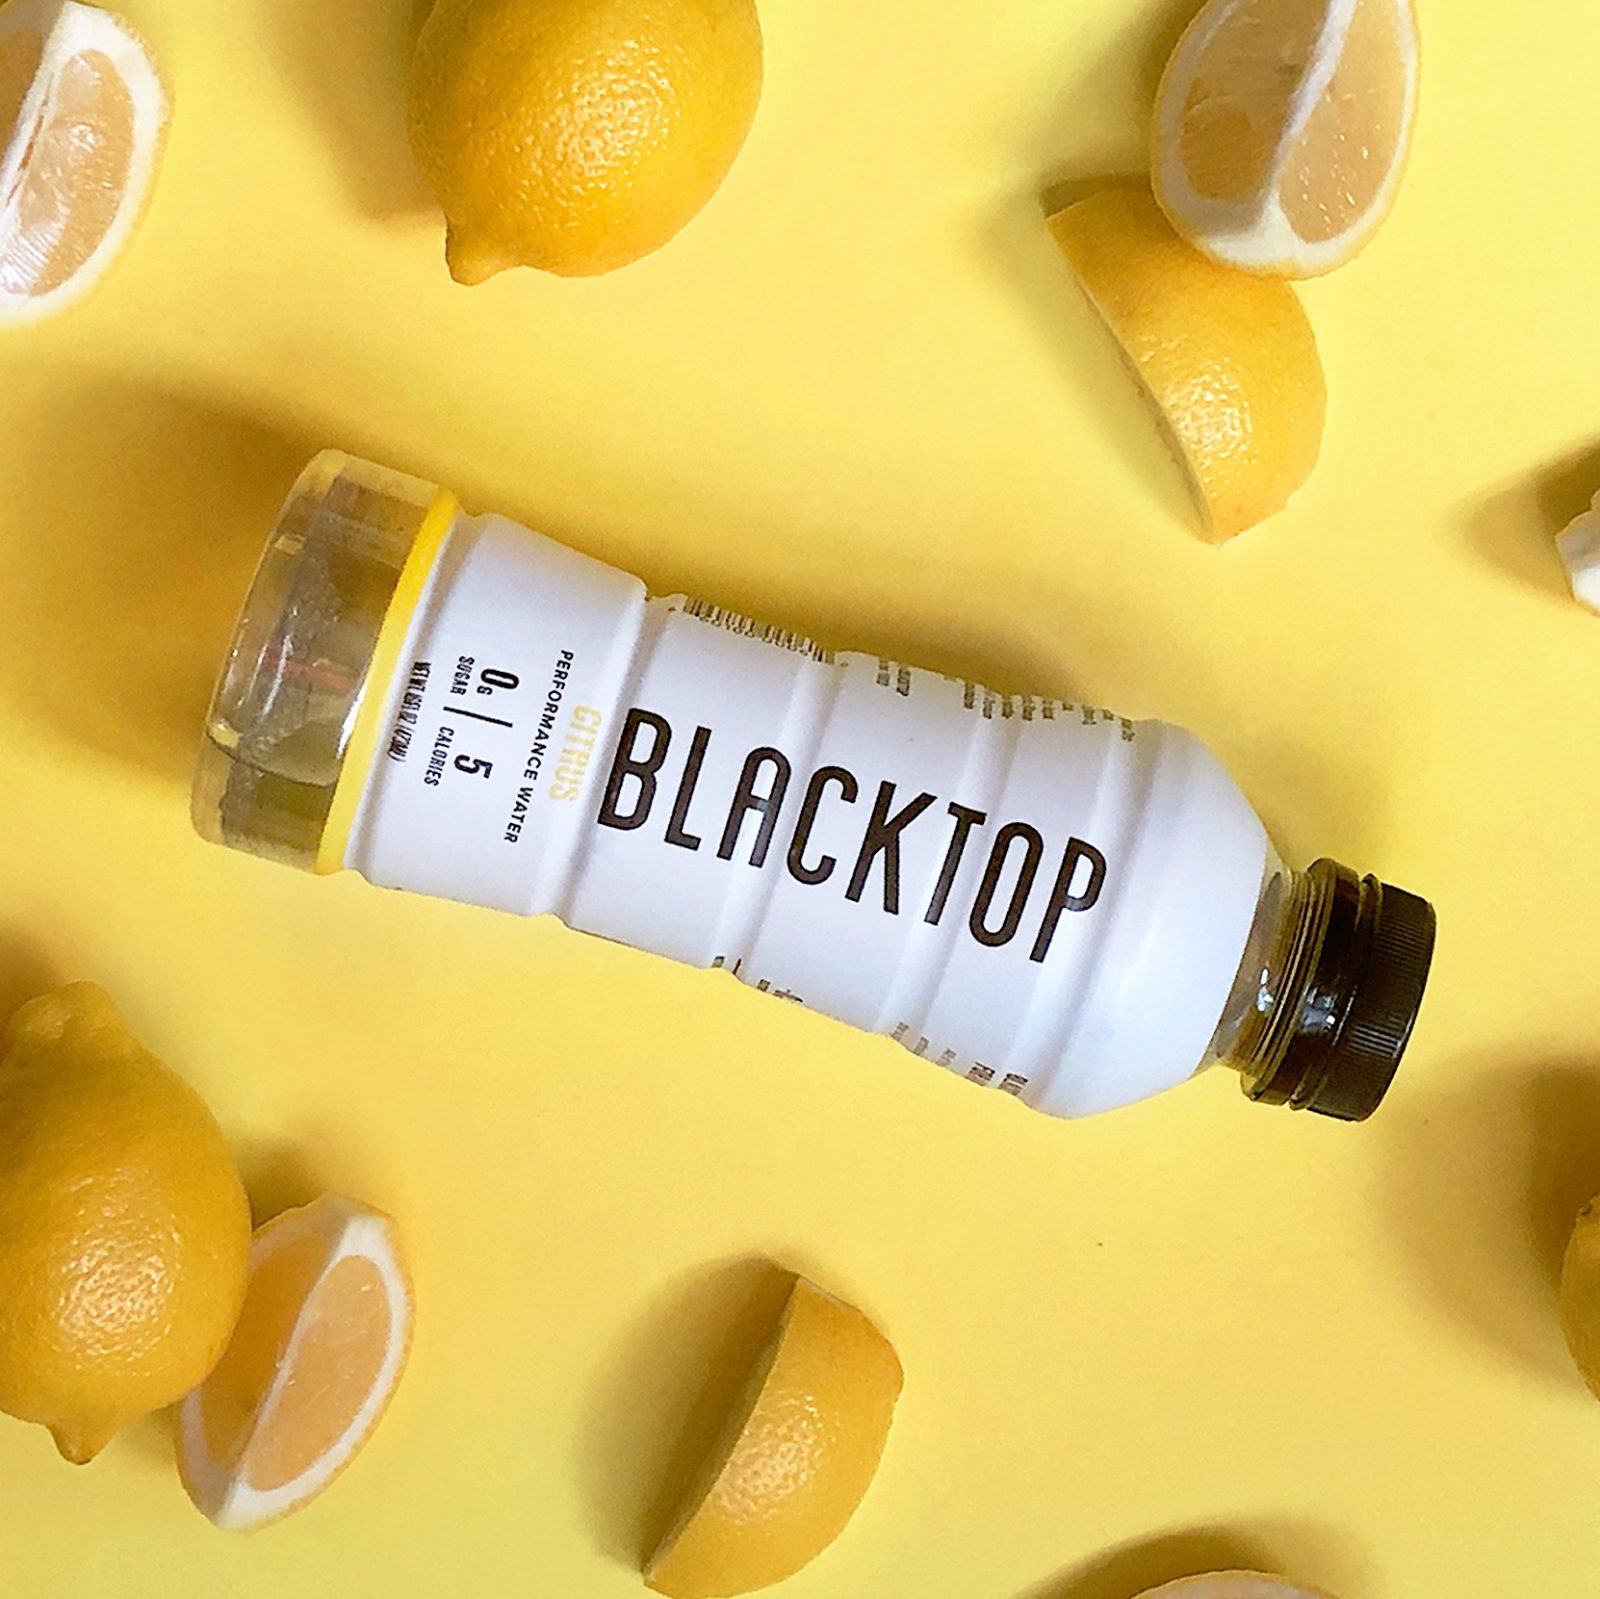 Branding and Packaging for Blacktop Performance Water